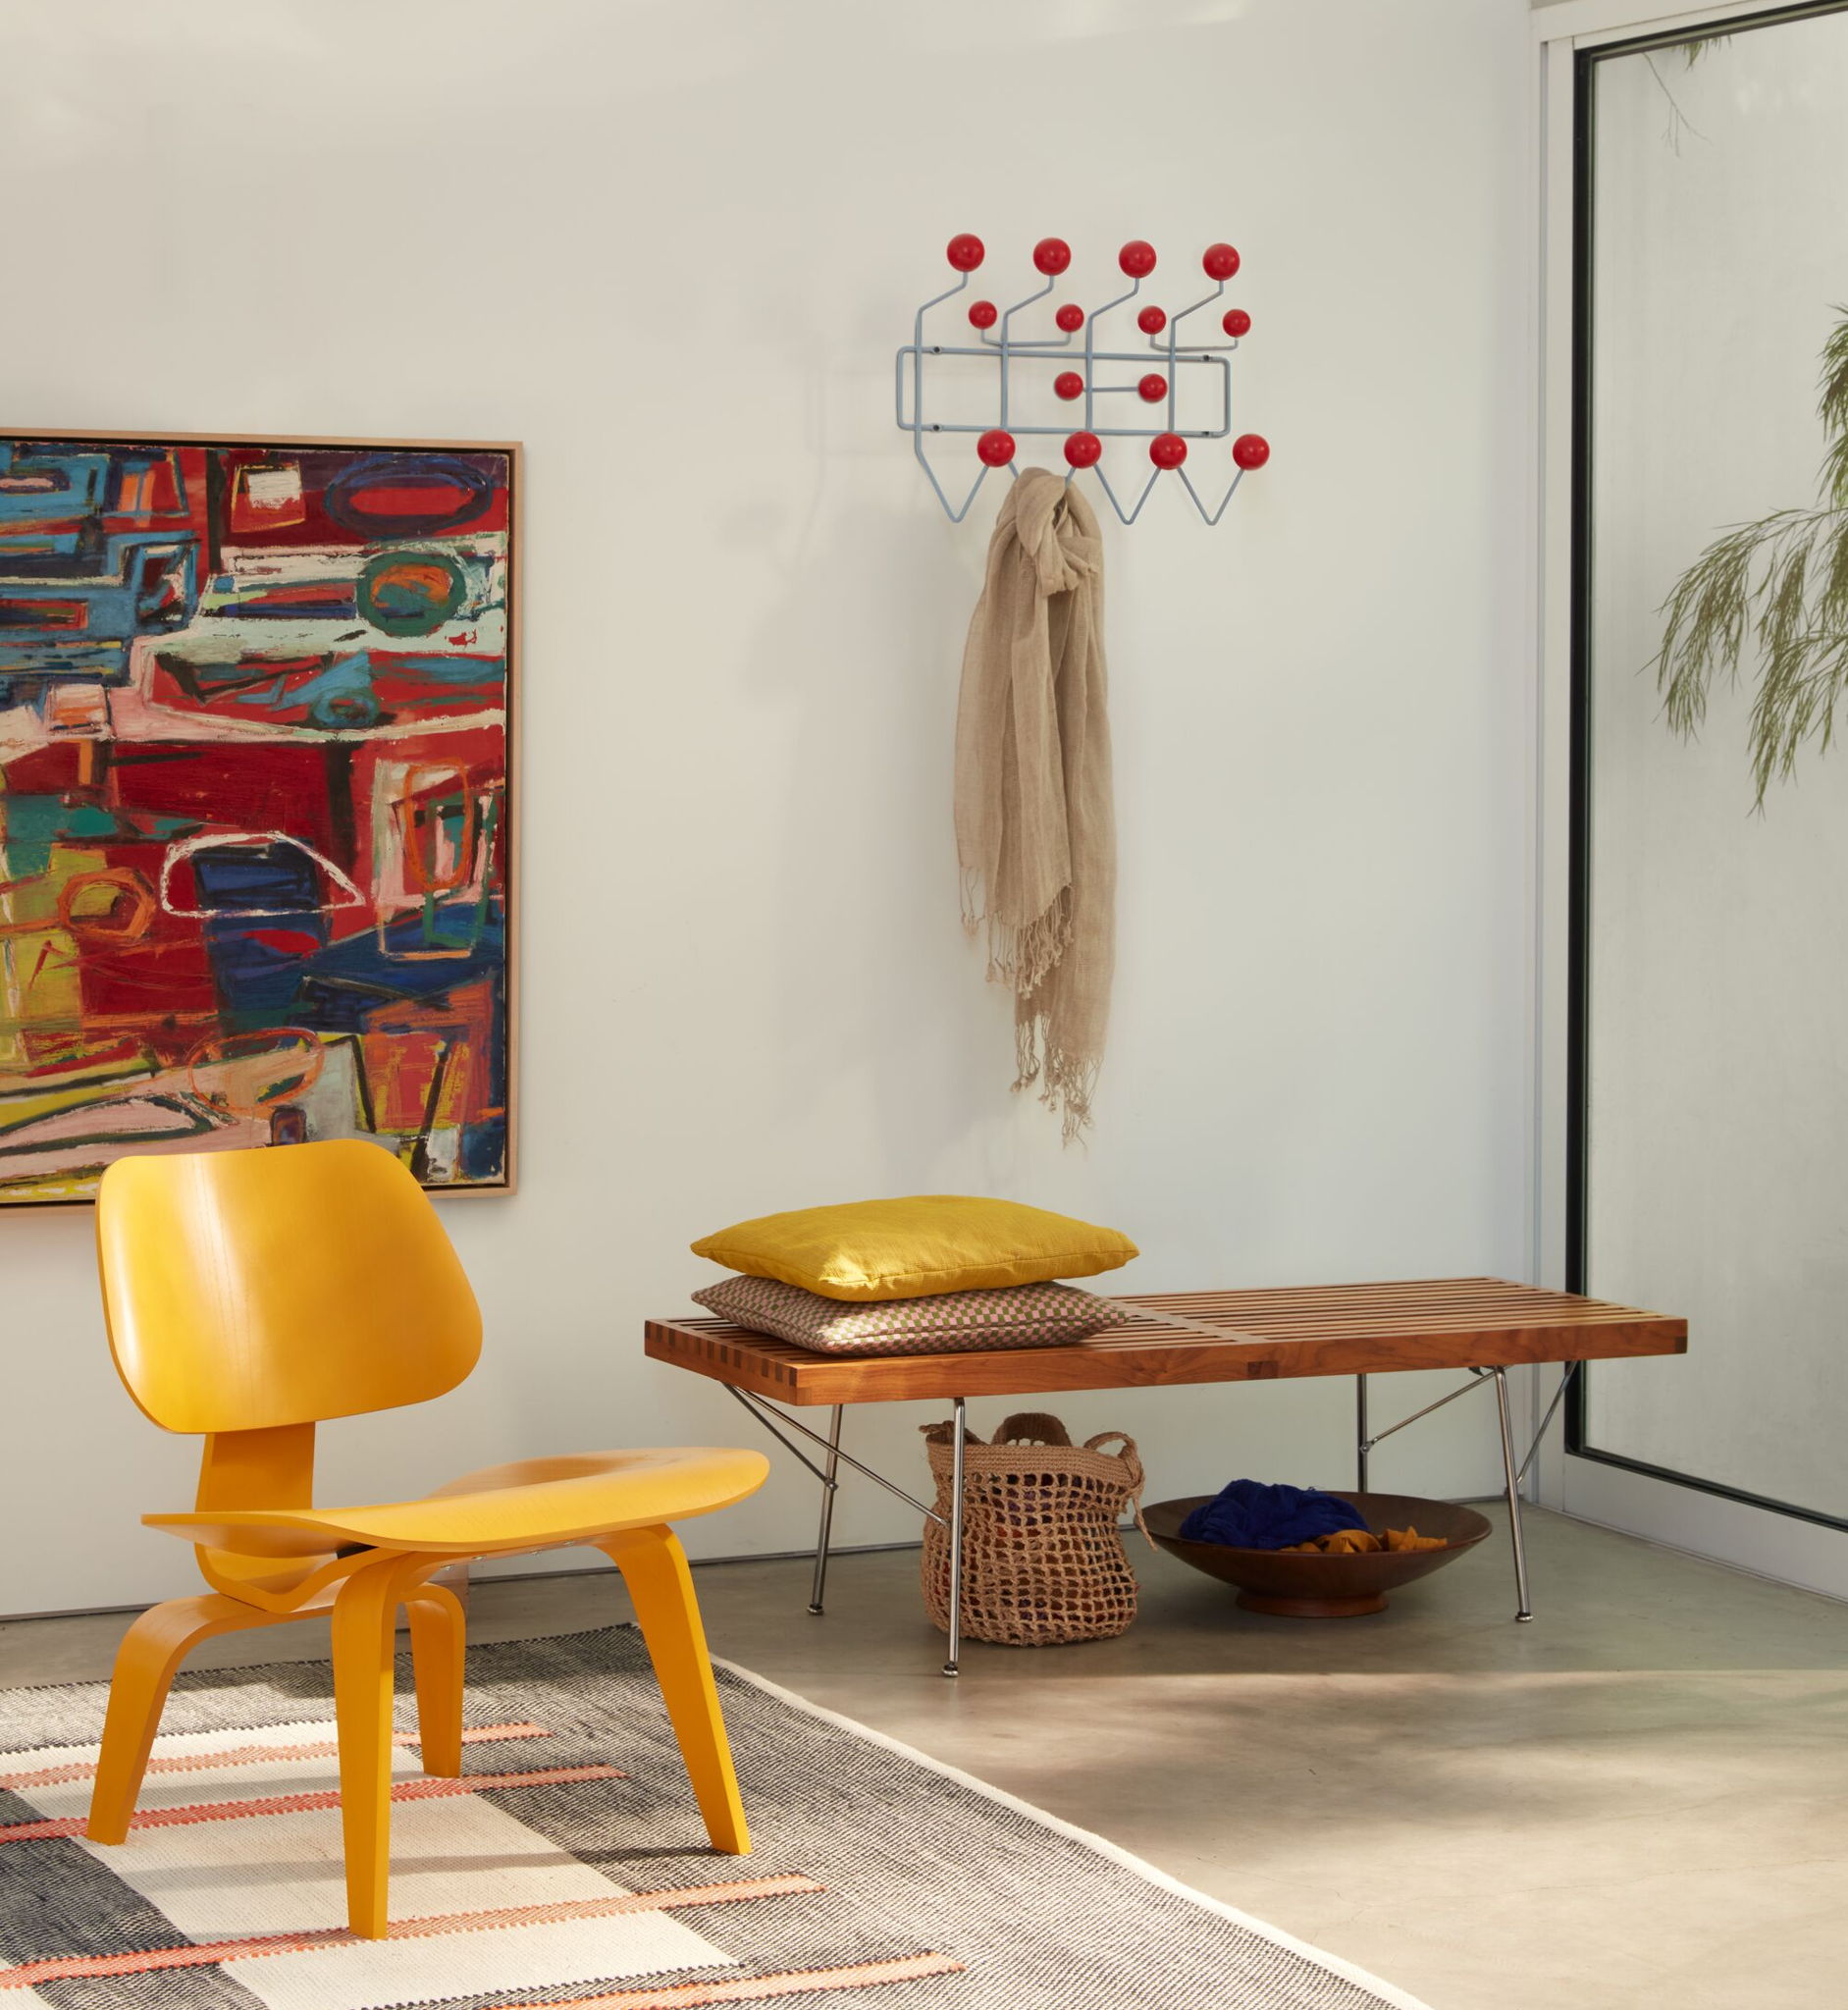 Herman Miller introduces new colorways of iconic Eames designs inspired by the archives